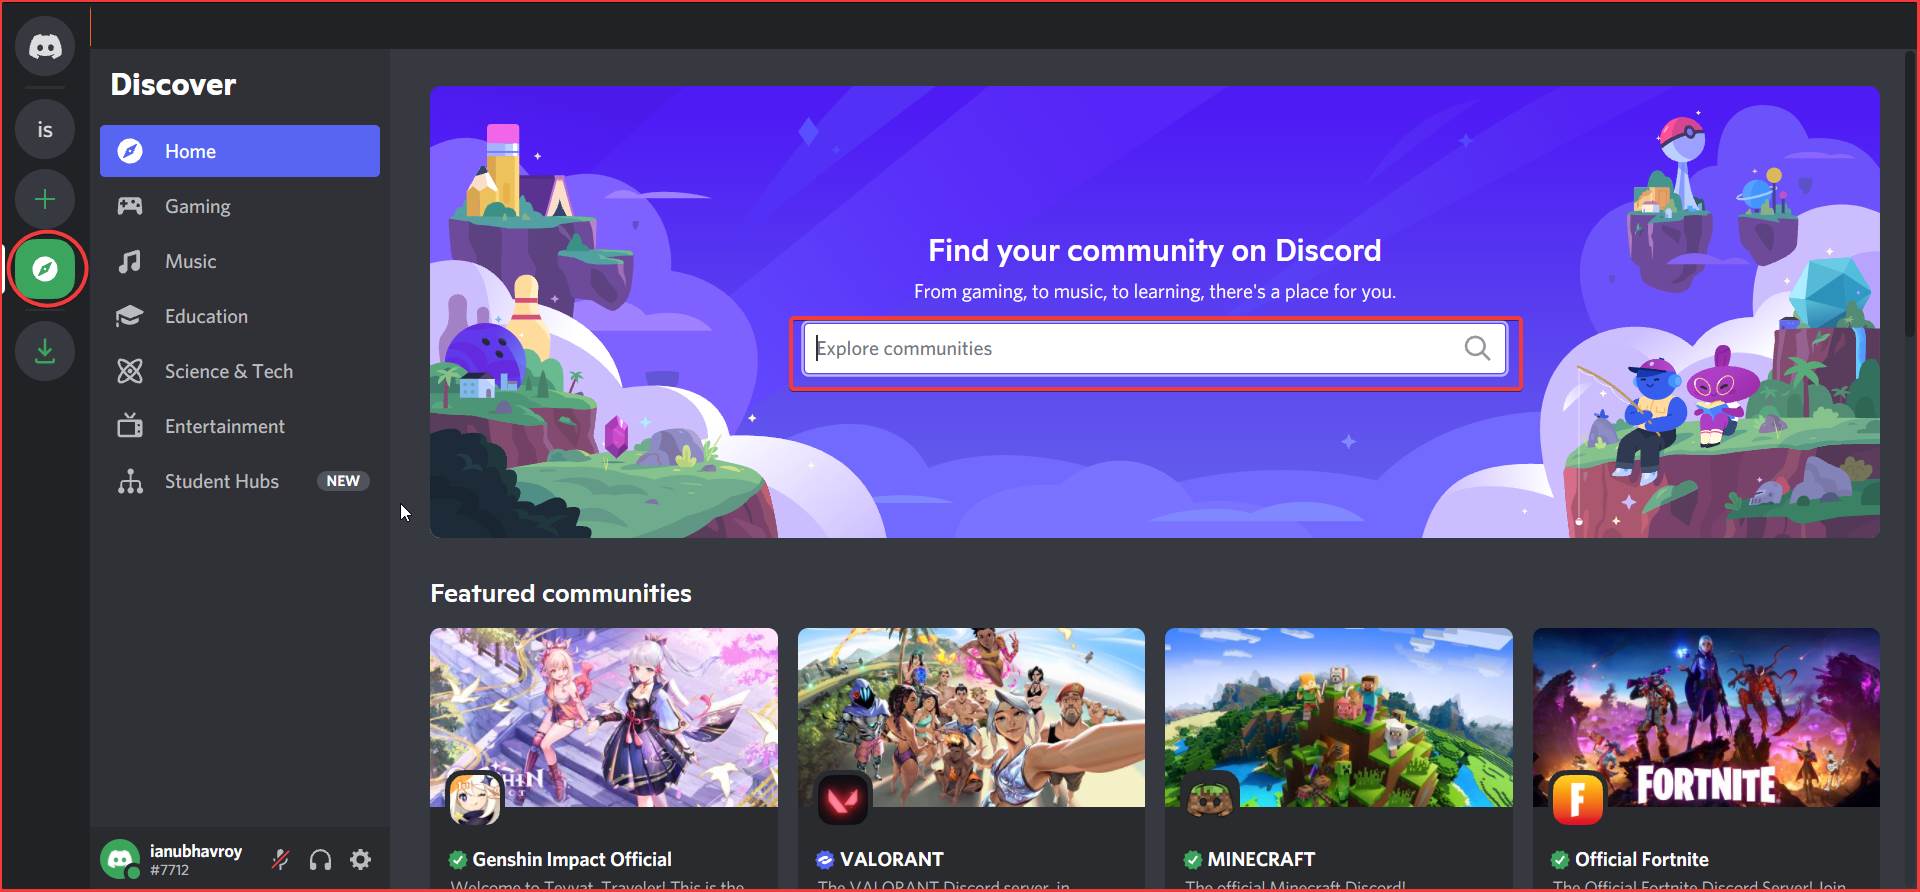 How to Find the Best Discord Servers